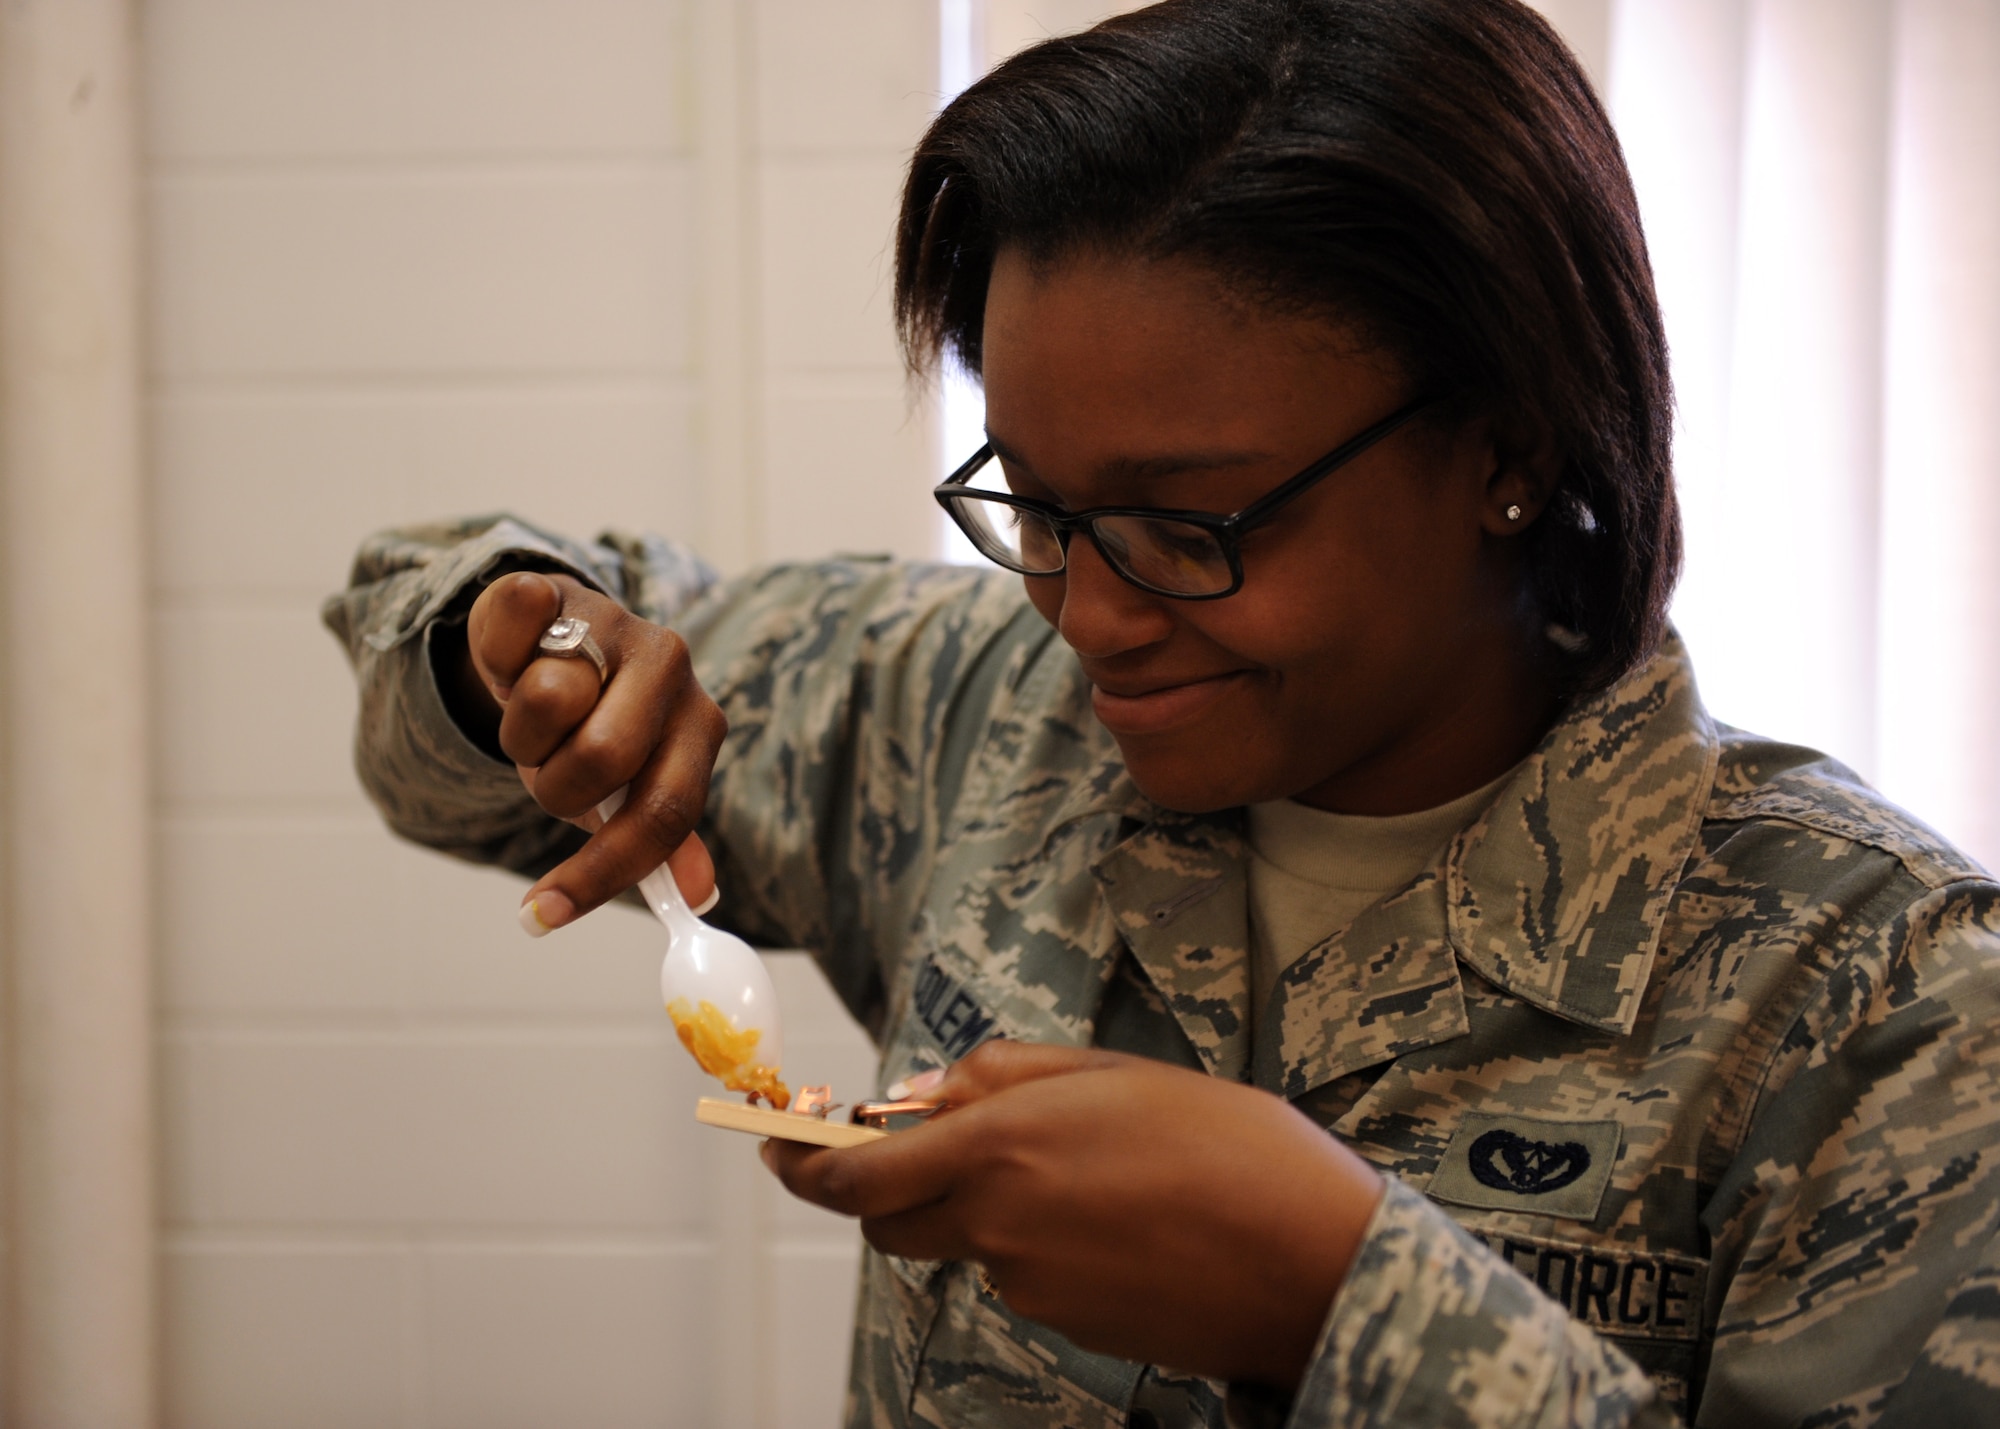 Airman 1st Class Debretta Coleman, a 19th Civil Engineer Squadron pest management apprentice, baits a mouse trap with peanut butter June 24, 2014, at Little Rock Air Force Base, Ark. Mice can cause damage to wiring, supplies and can even spread disease. (U.S. Air Force photo by Airman 1st Class Scott Poe)